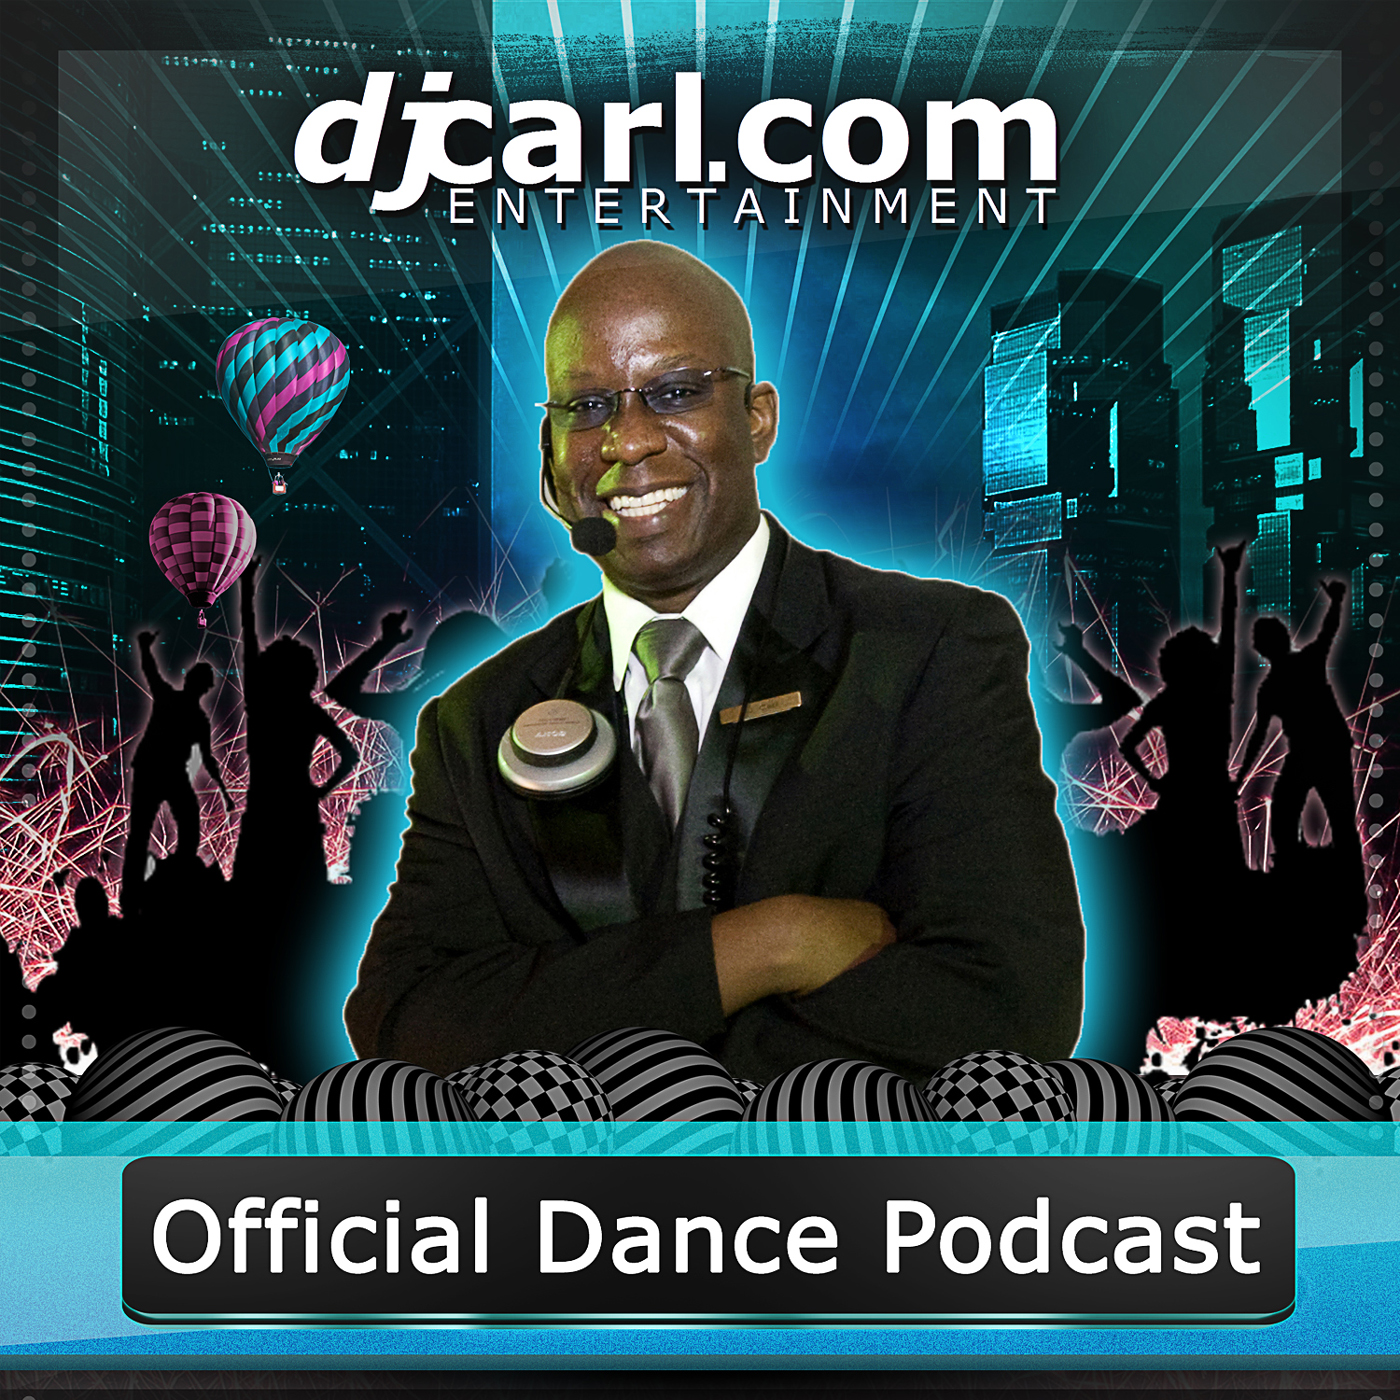 118-Counting Down Dance Music Mixshow by DJ Carl